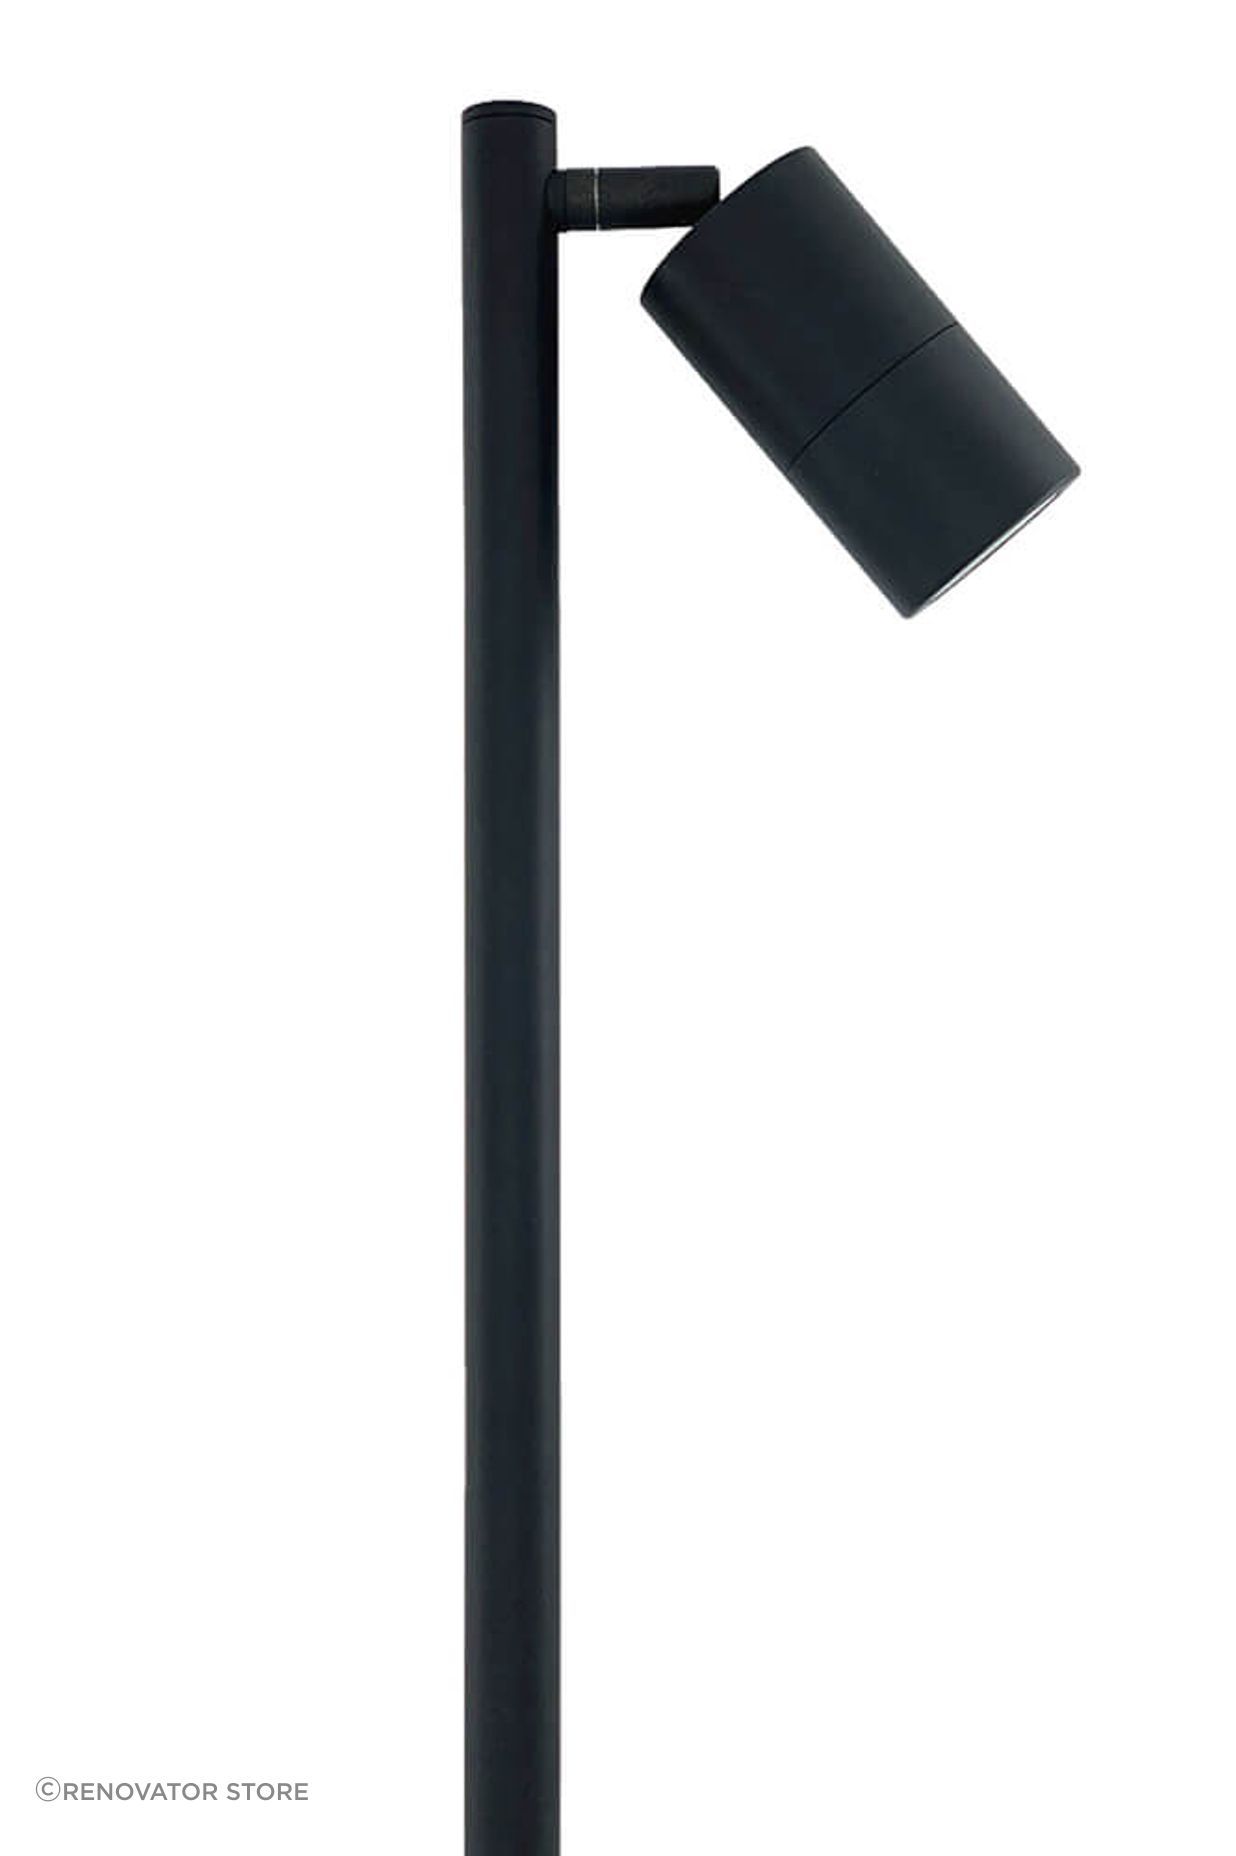 Outdoor Garden Single Spiked Pole Light from Renovator Store